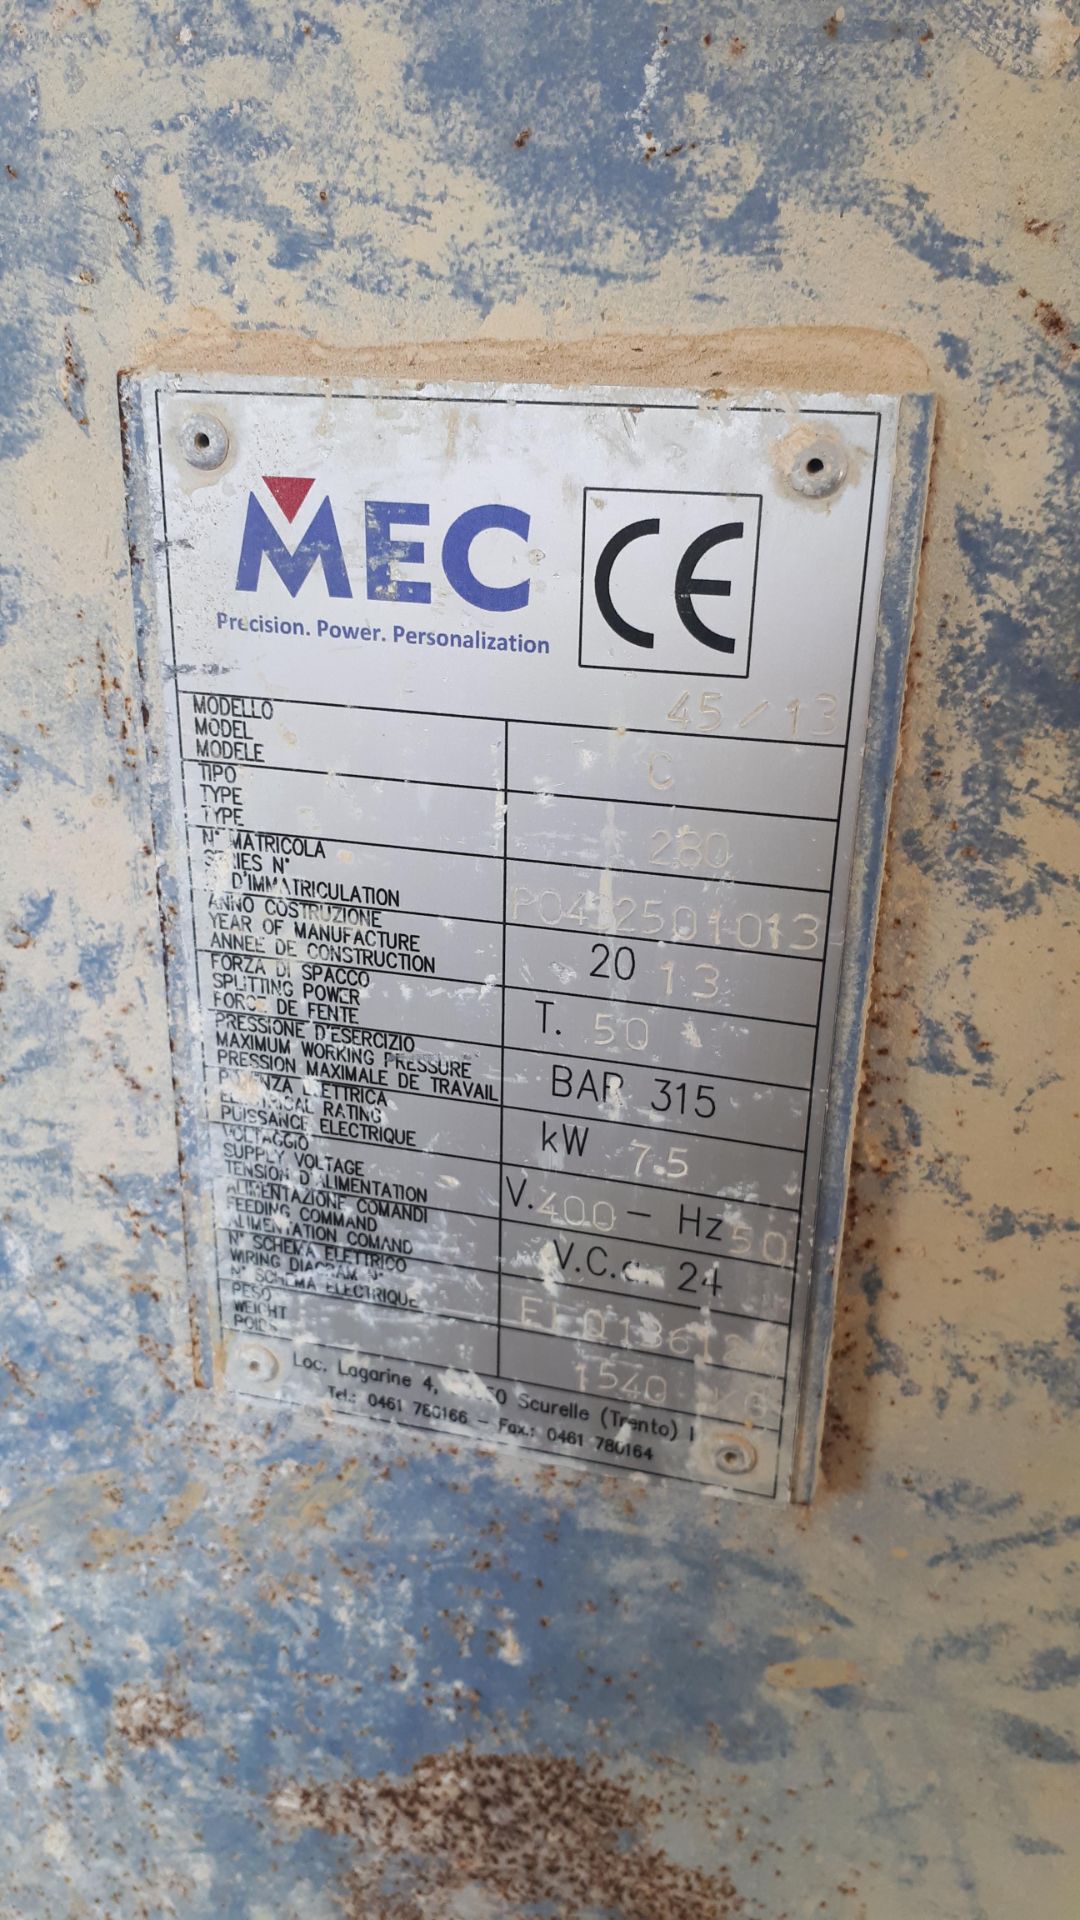 MEC C280 Stone Splitter/Guillotine Machine, Serial Number P0432501013 (2013) with steel roler - Image 6 of 20